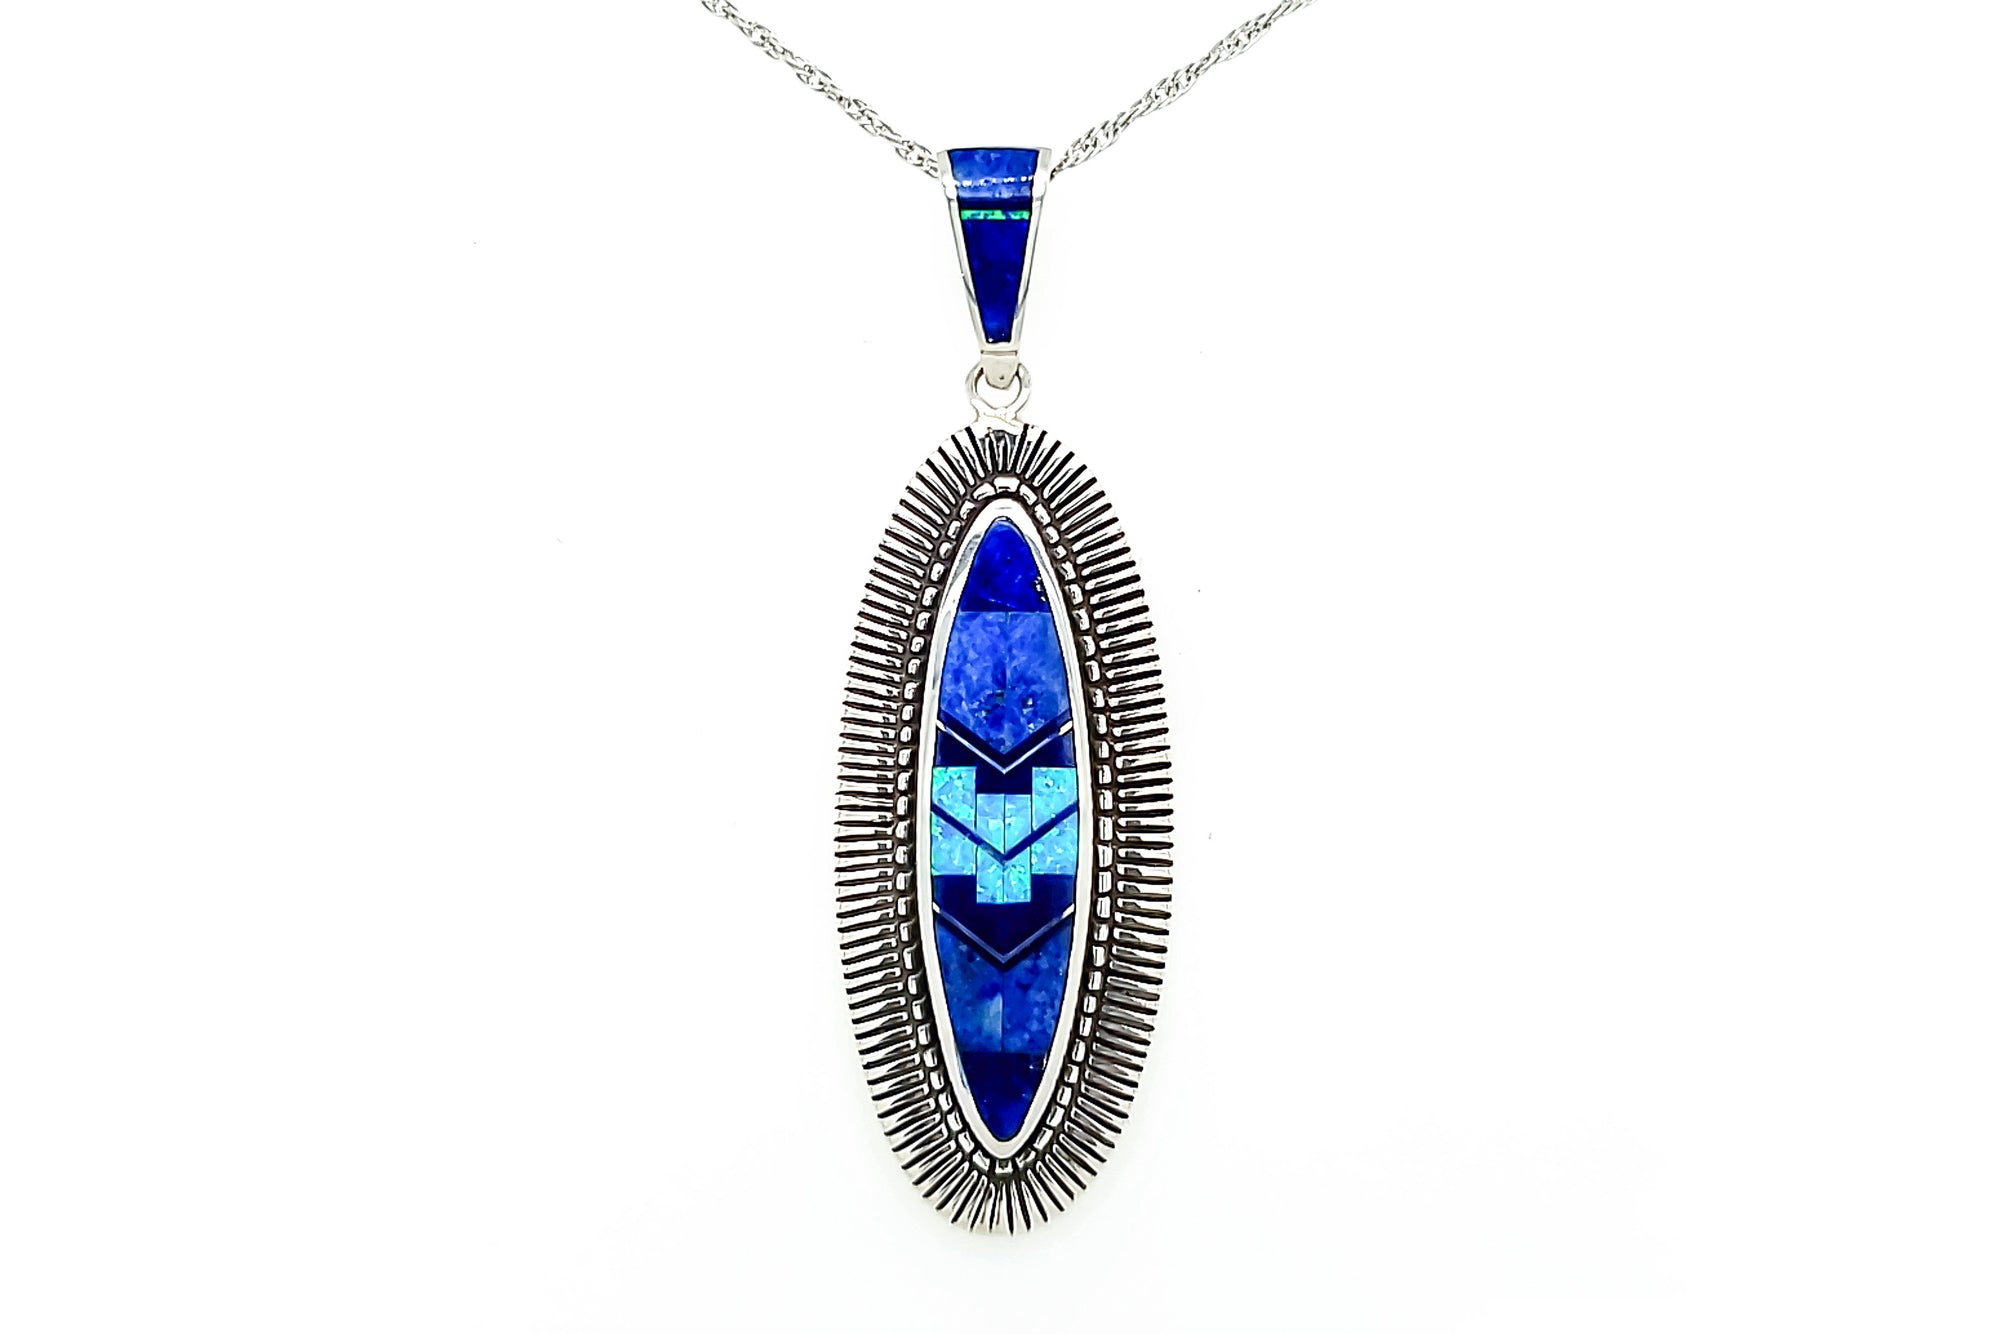 Textured Blue Sky Pendant by David Rosales